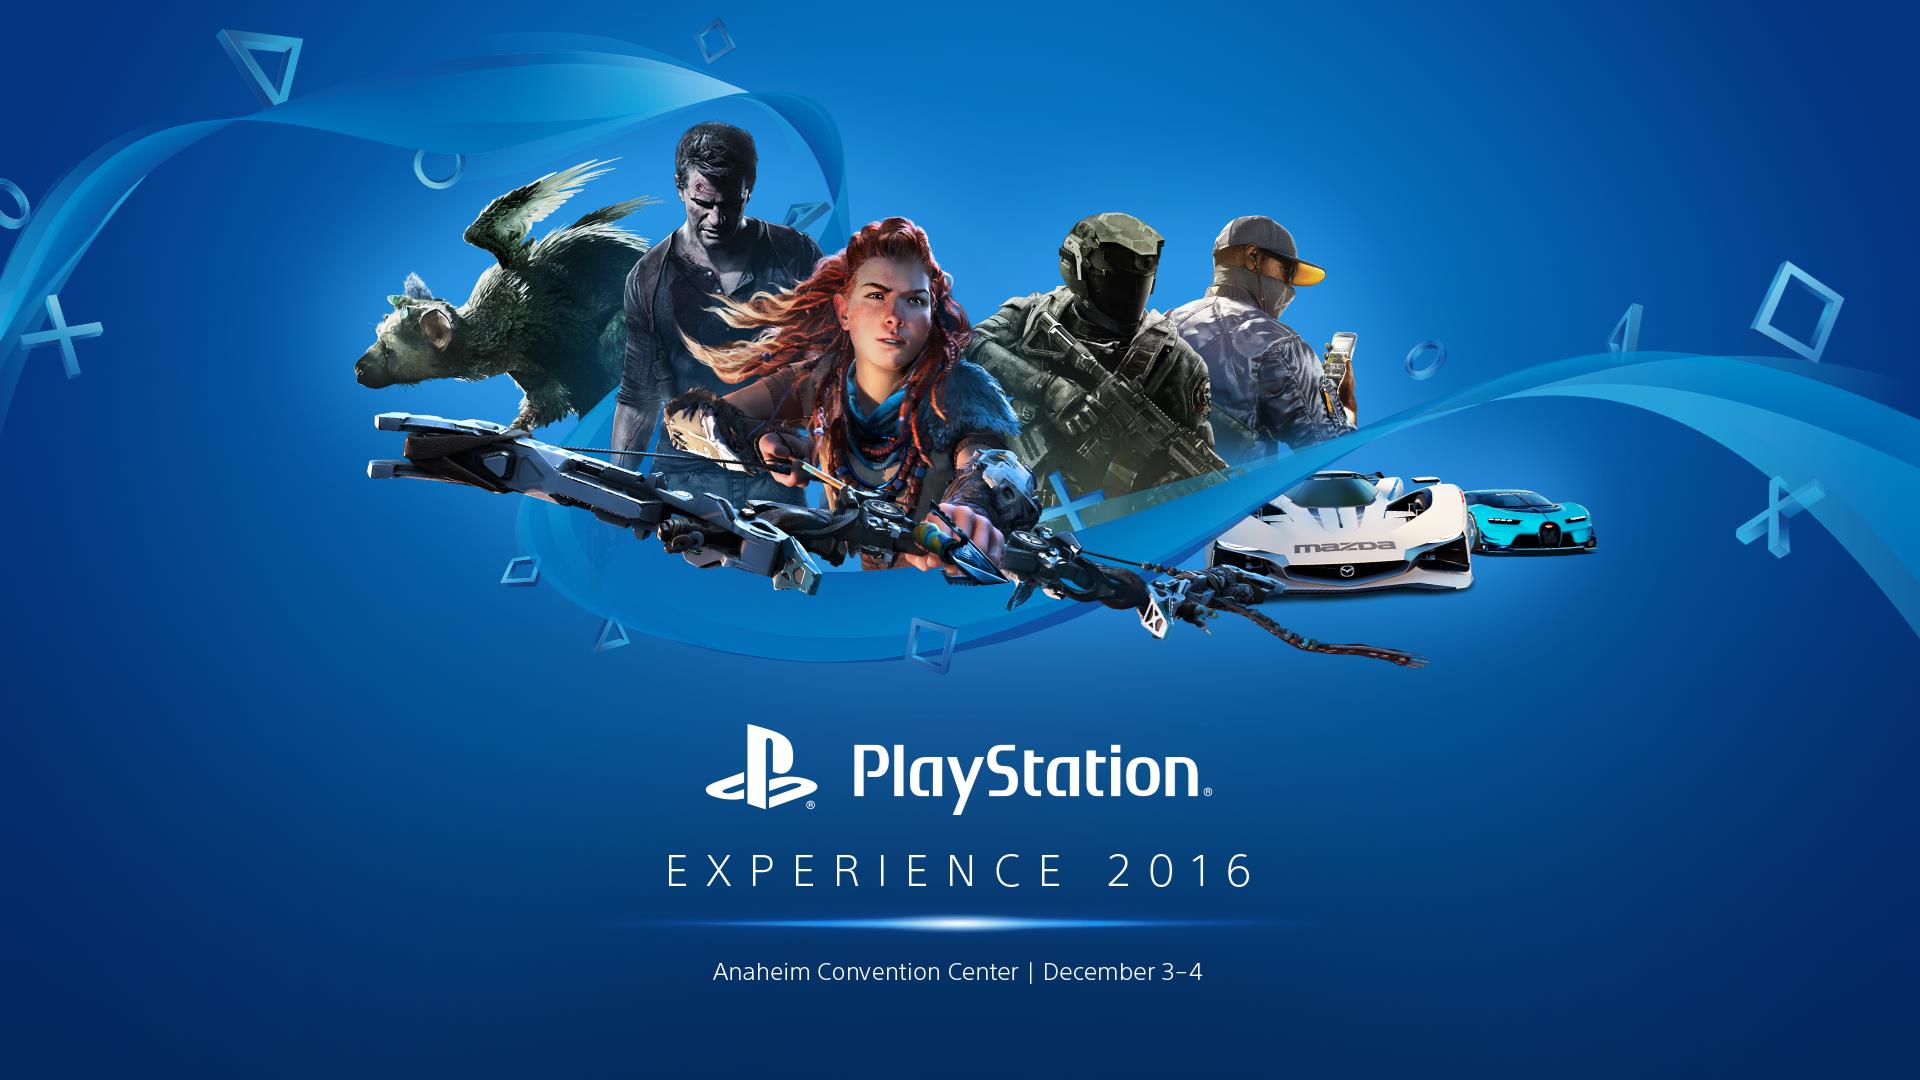 Image for PlayStation Experience 2016 games line-up confirmed, includes some mysteries